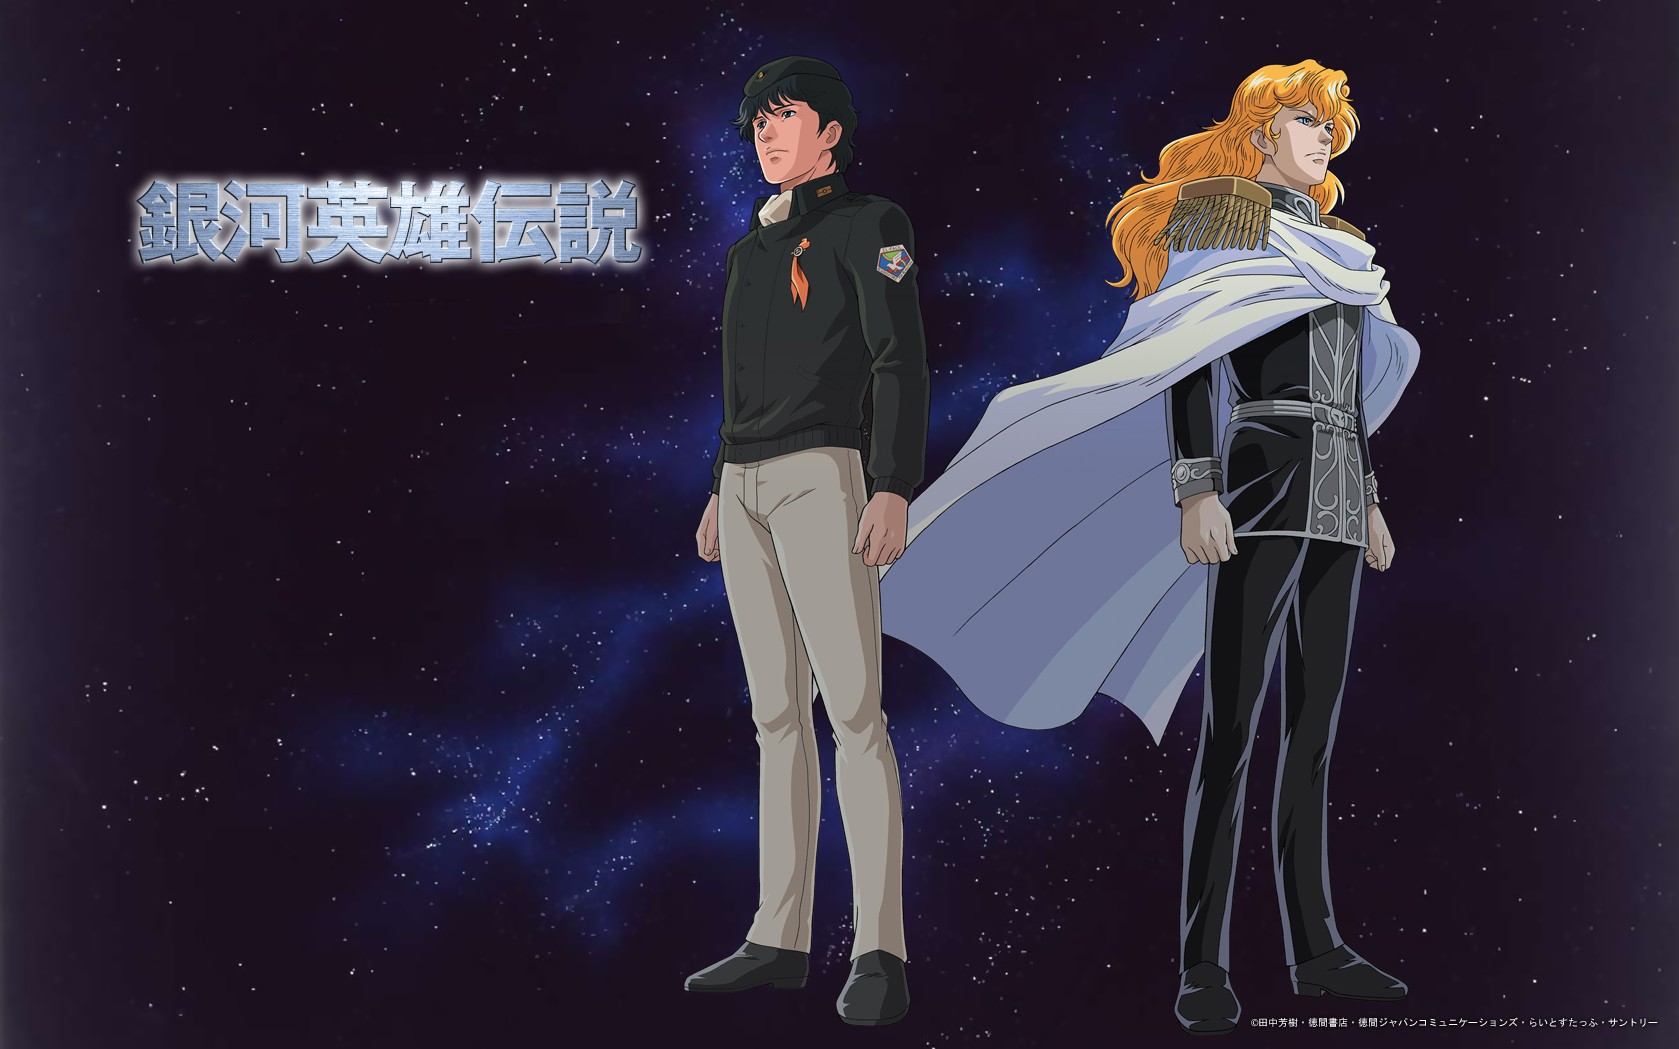 Amazing Legend Of The Galactic Heroes Pictures & Backgrounds